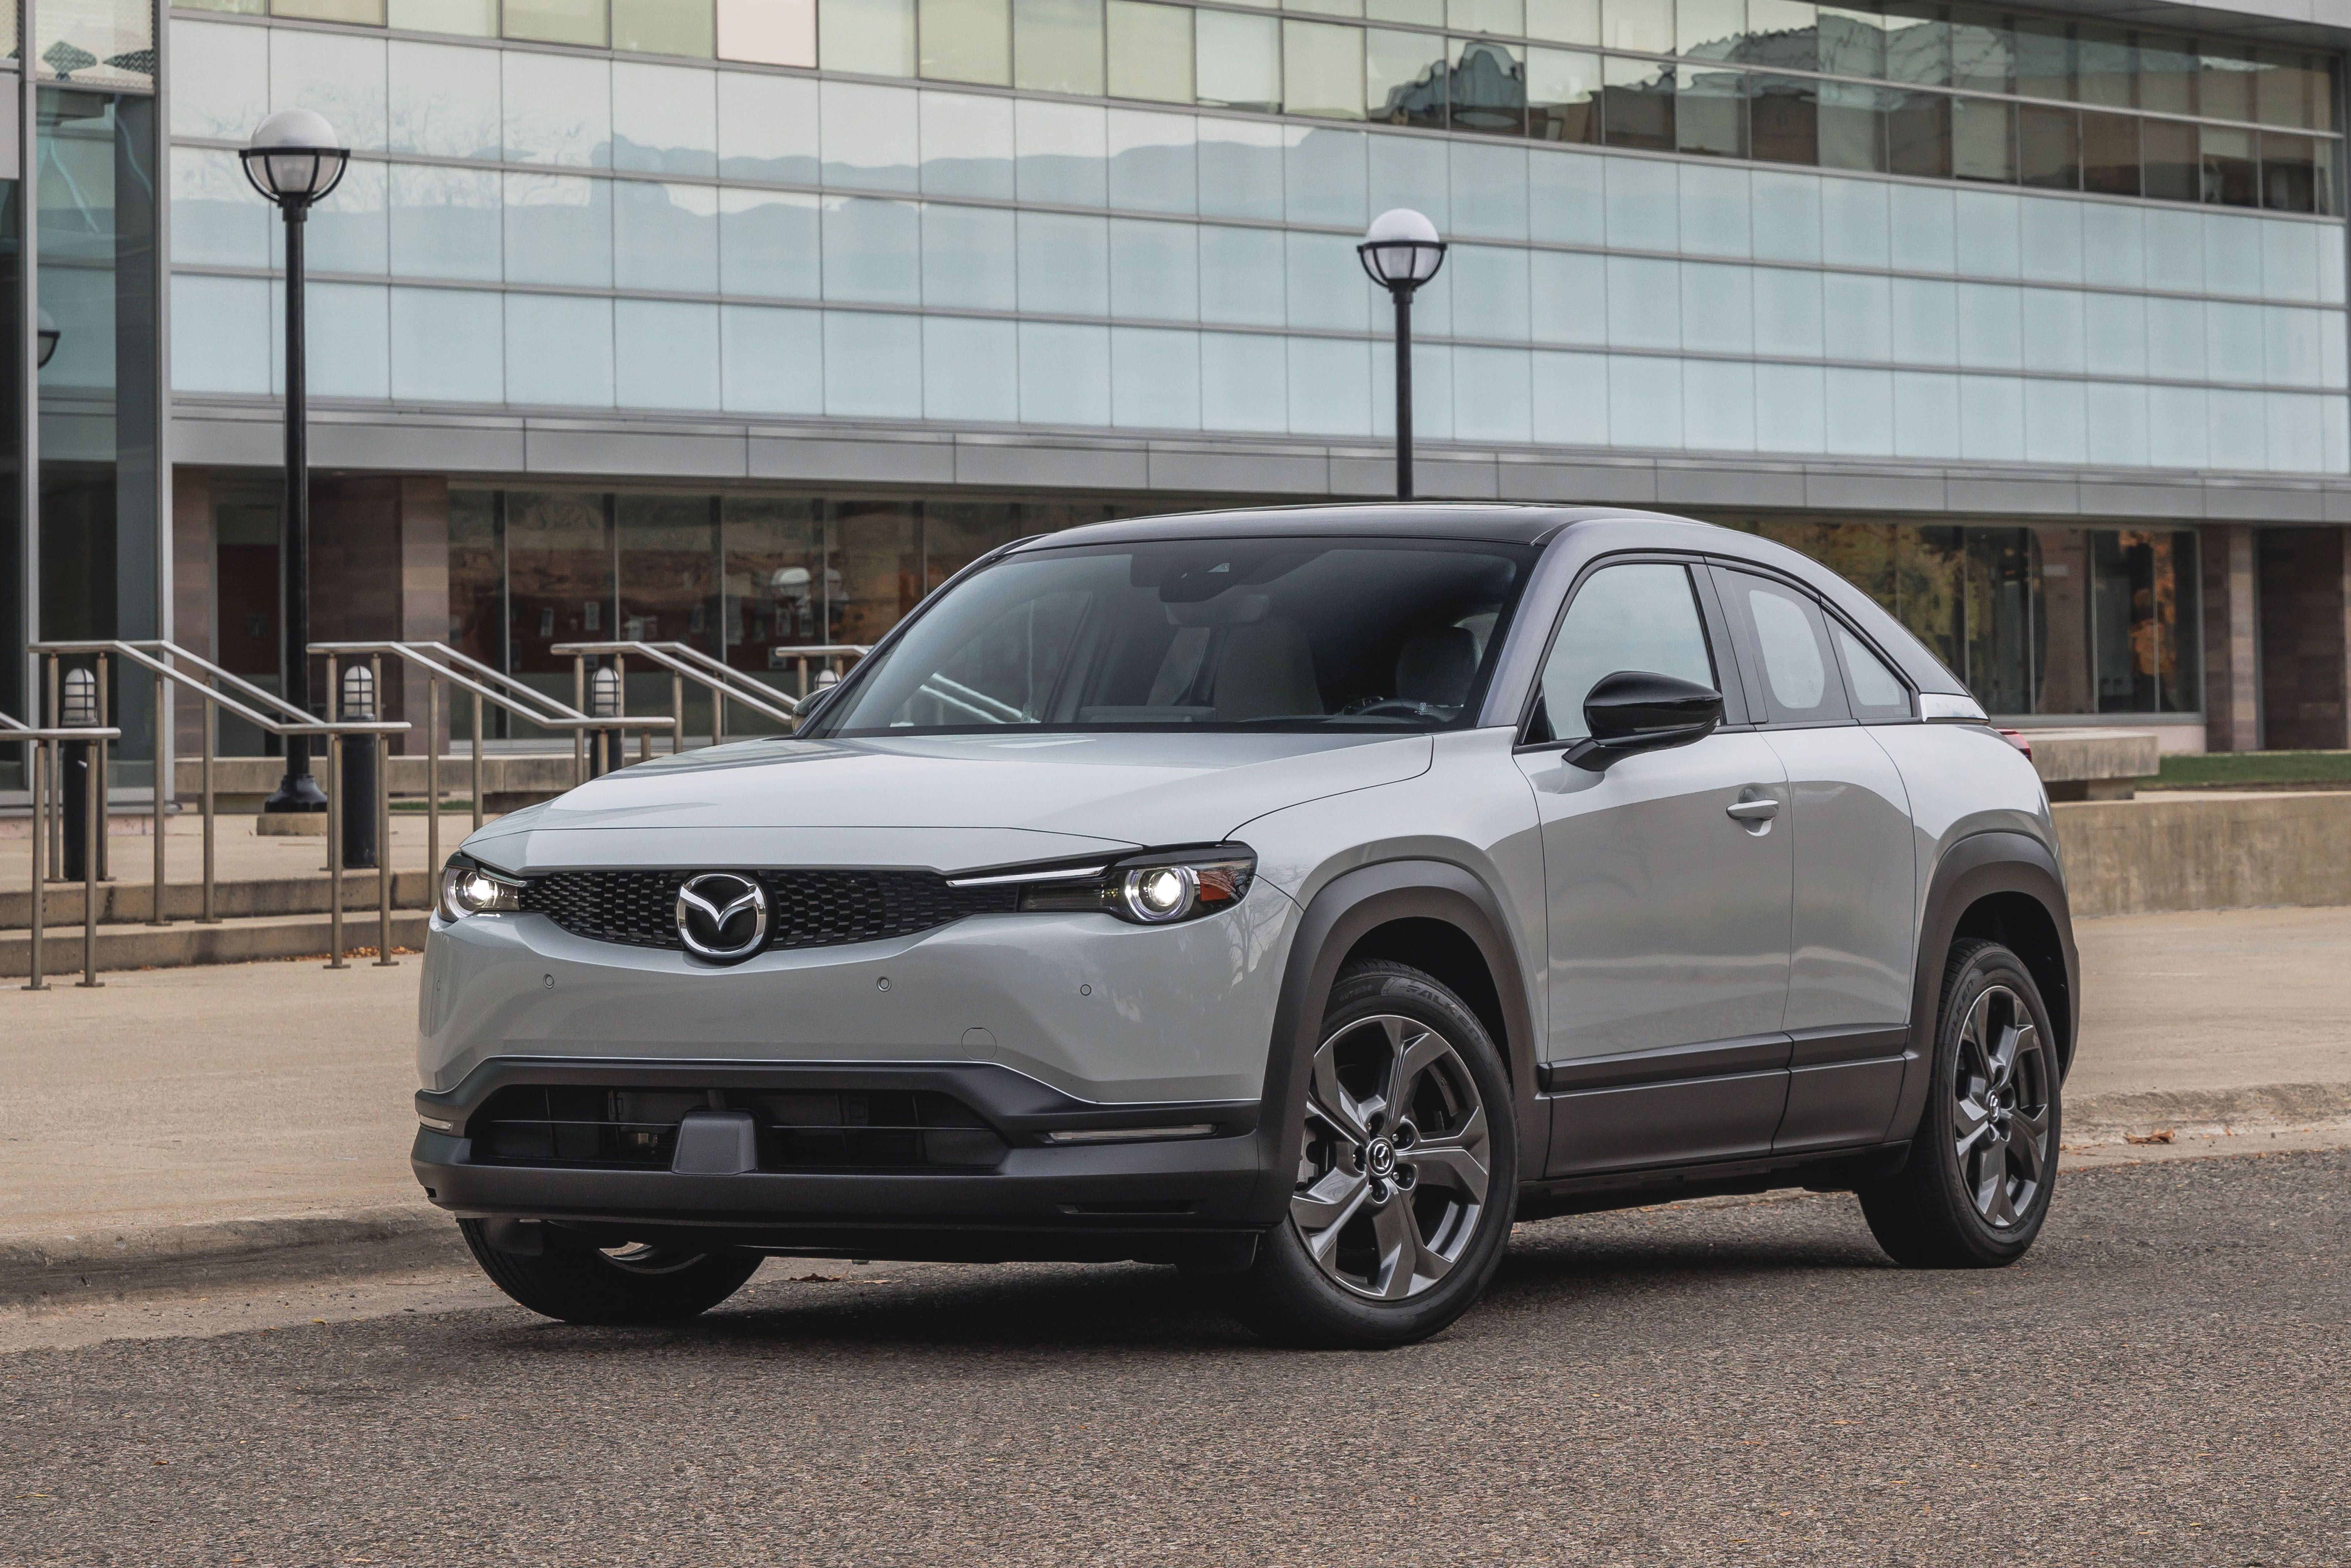 2022 Mazda MX-30: All You Need to Know